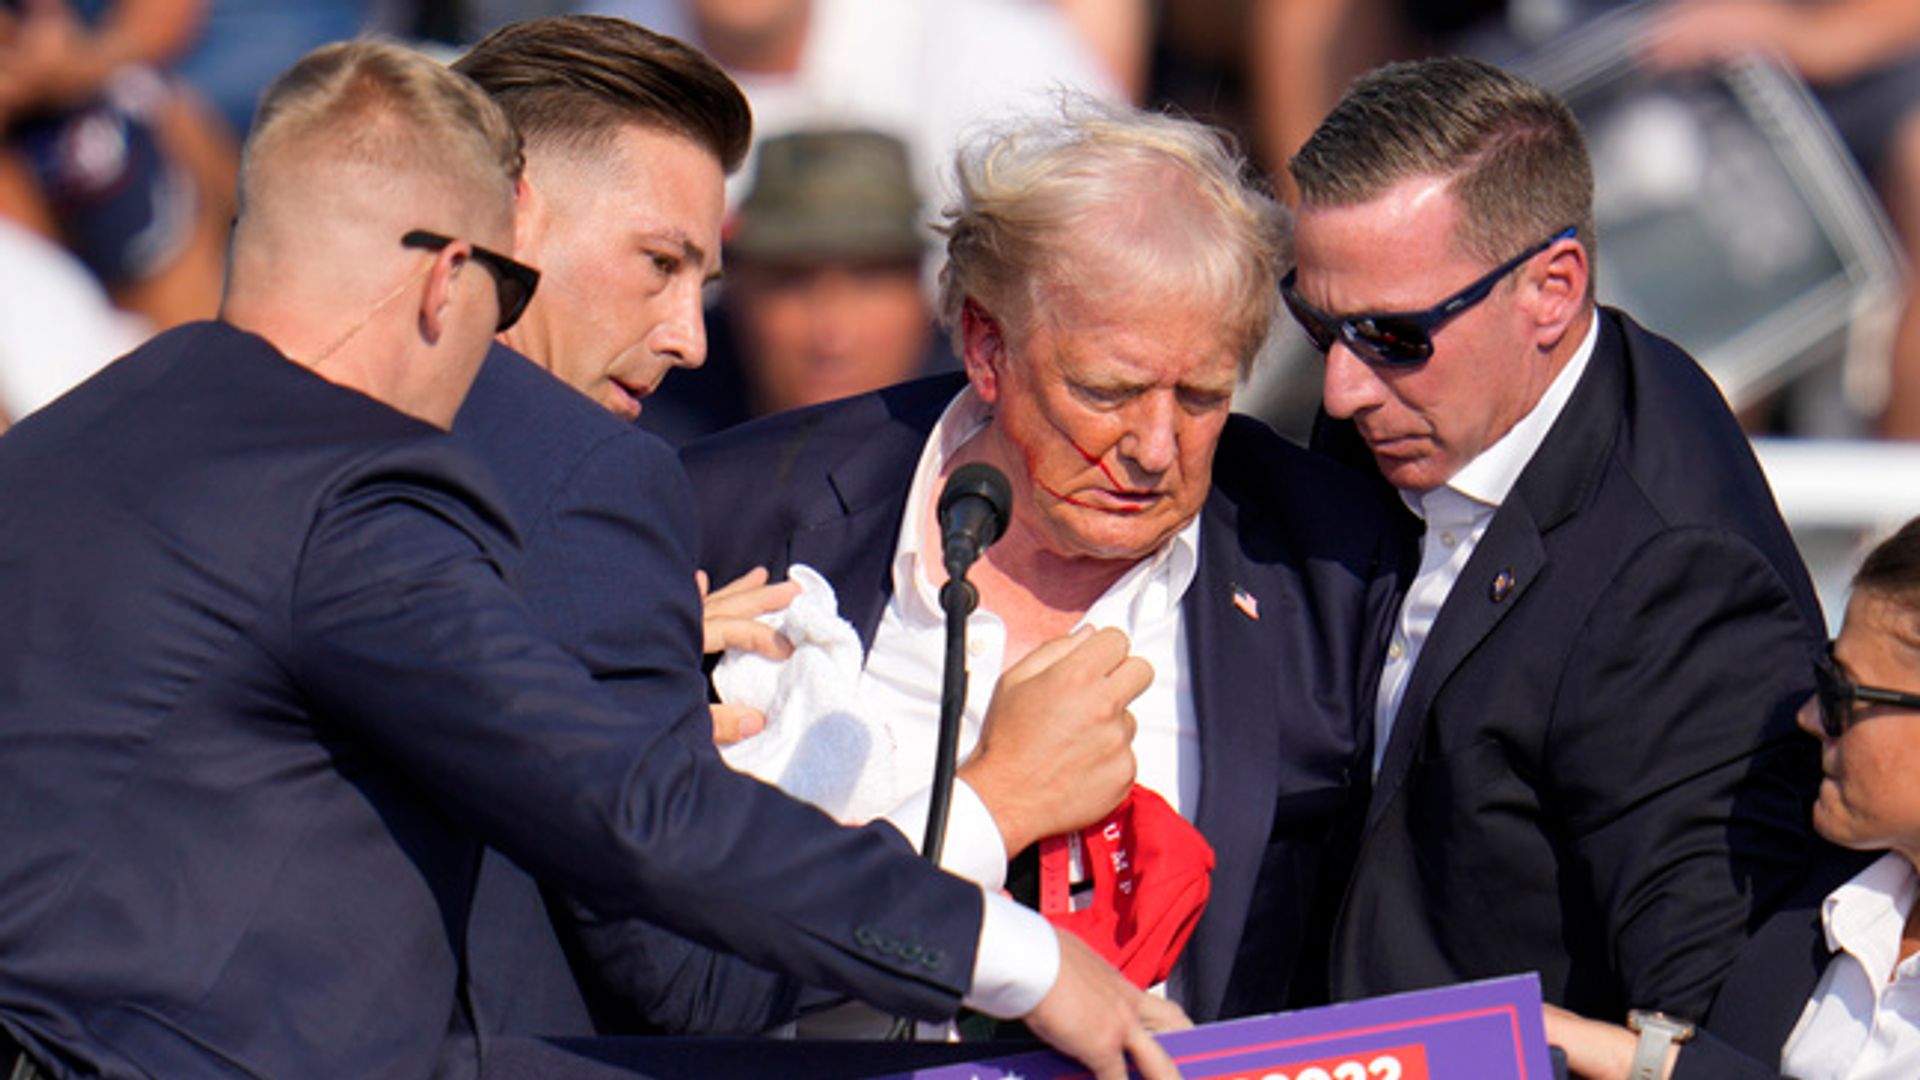 Two reportedly dead at Donald Trump rally - as former president injured and rushed off stage